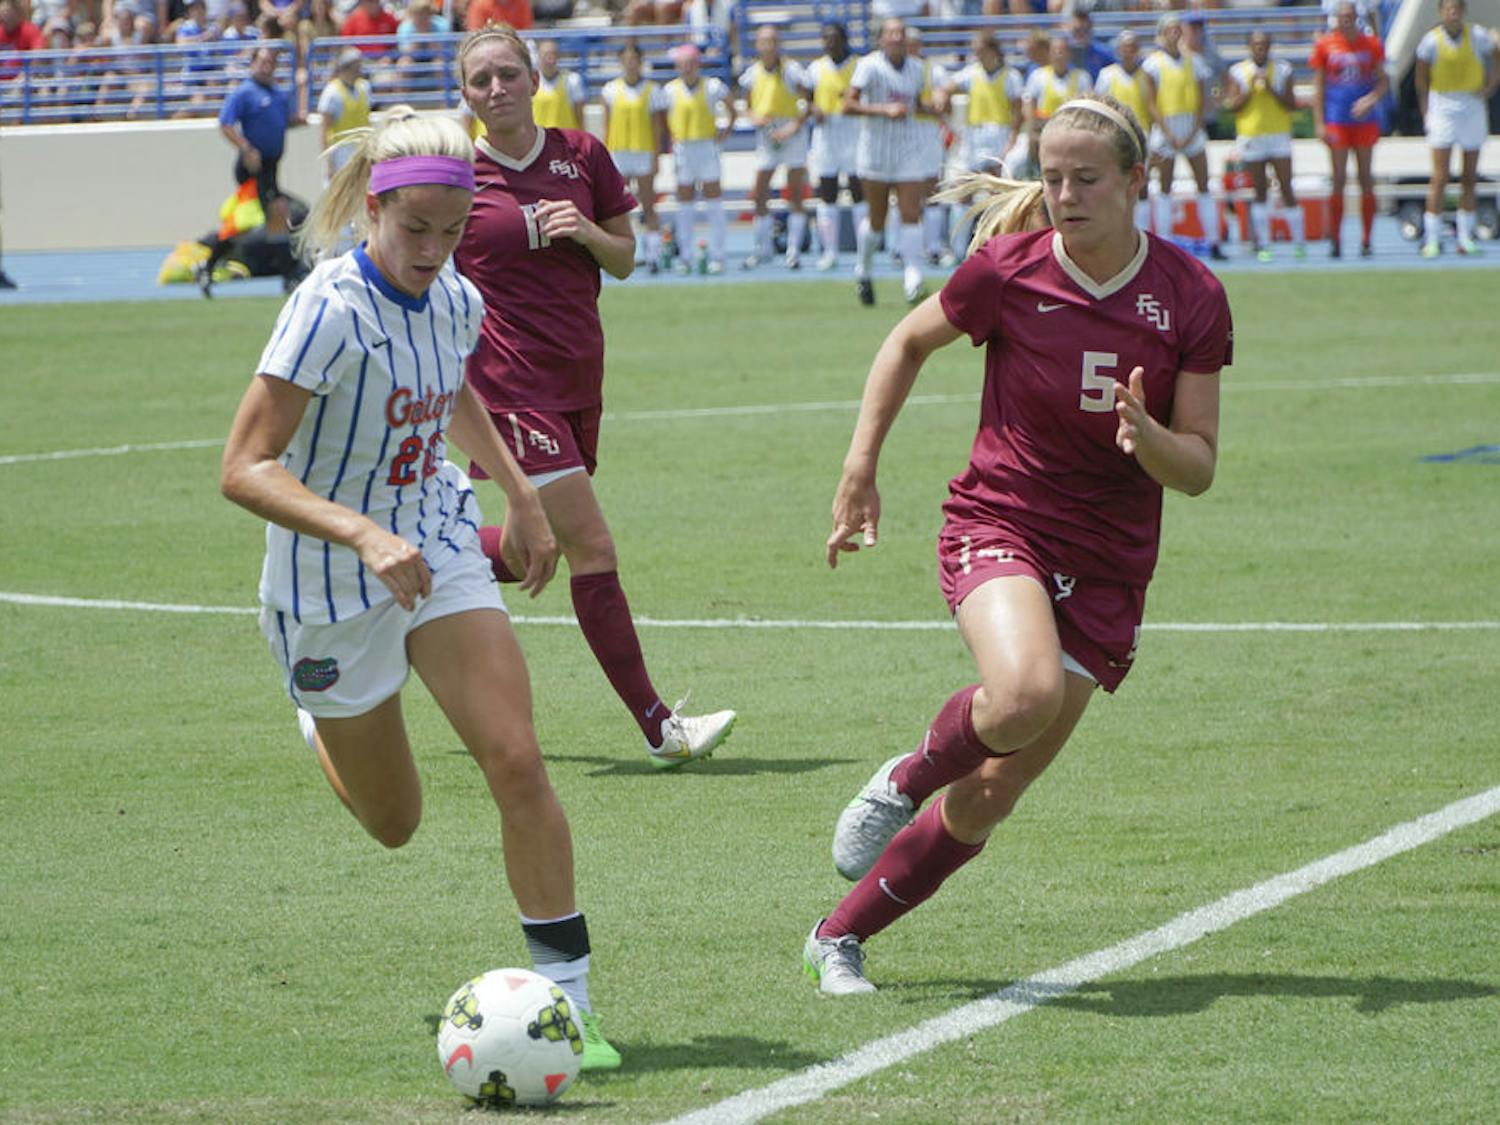 UF defender Christen Westphal dribbles the ball during Florida's 3-2 win against Florida State on Aug. 30, 2015, at James G. Pressly stadium.